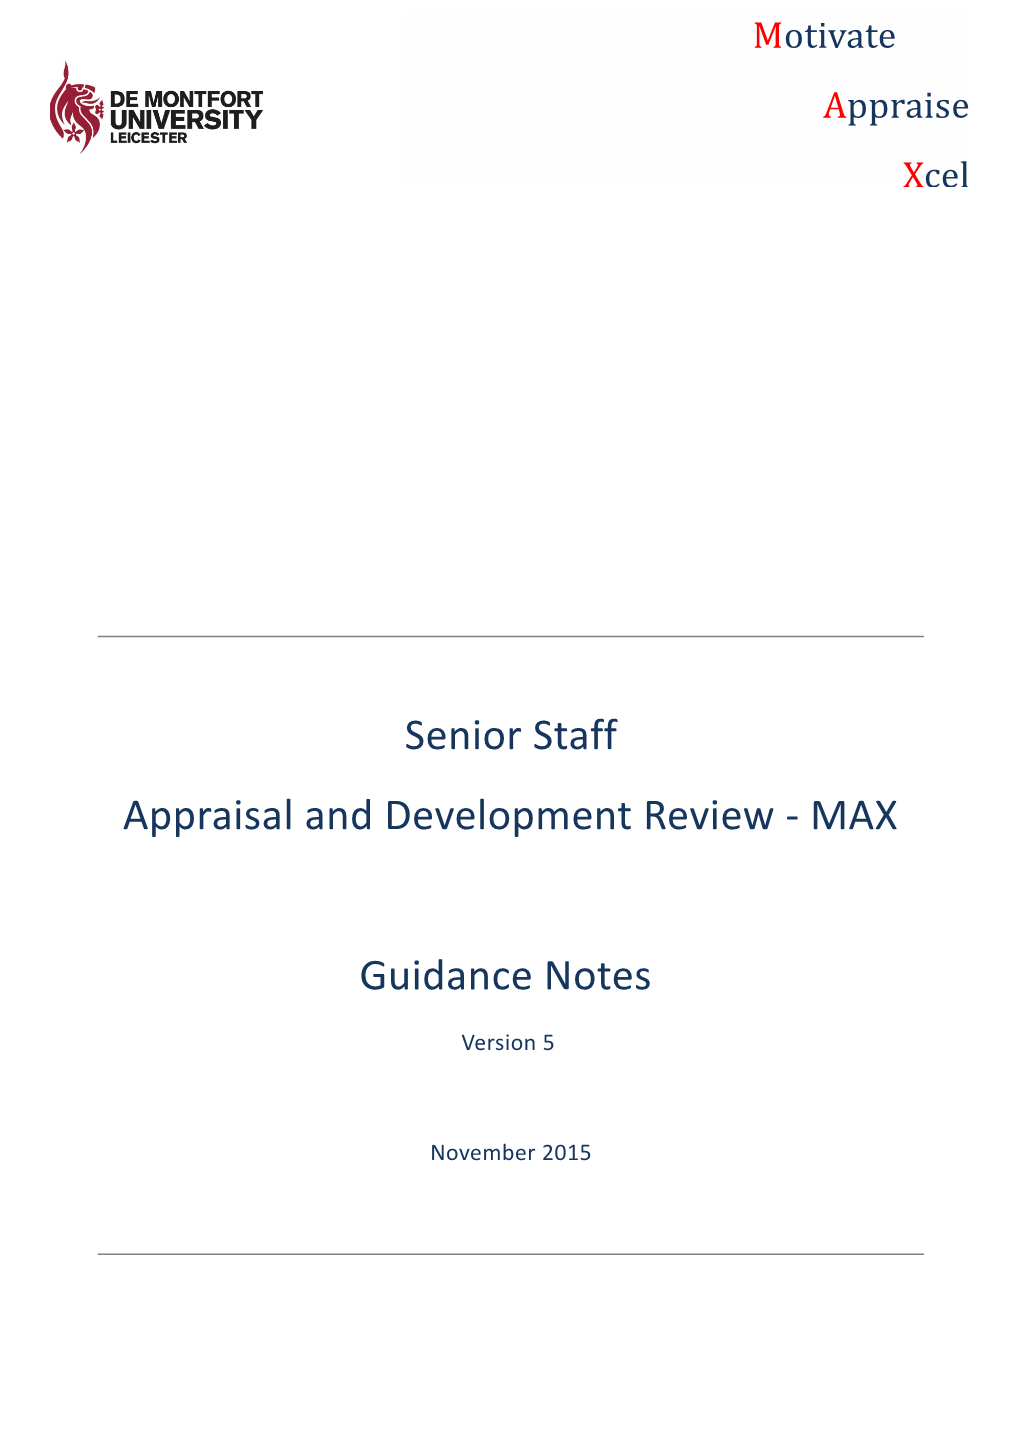 2. High-Level Timescales for Annual MAX Review Cycle 3